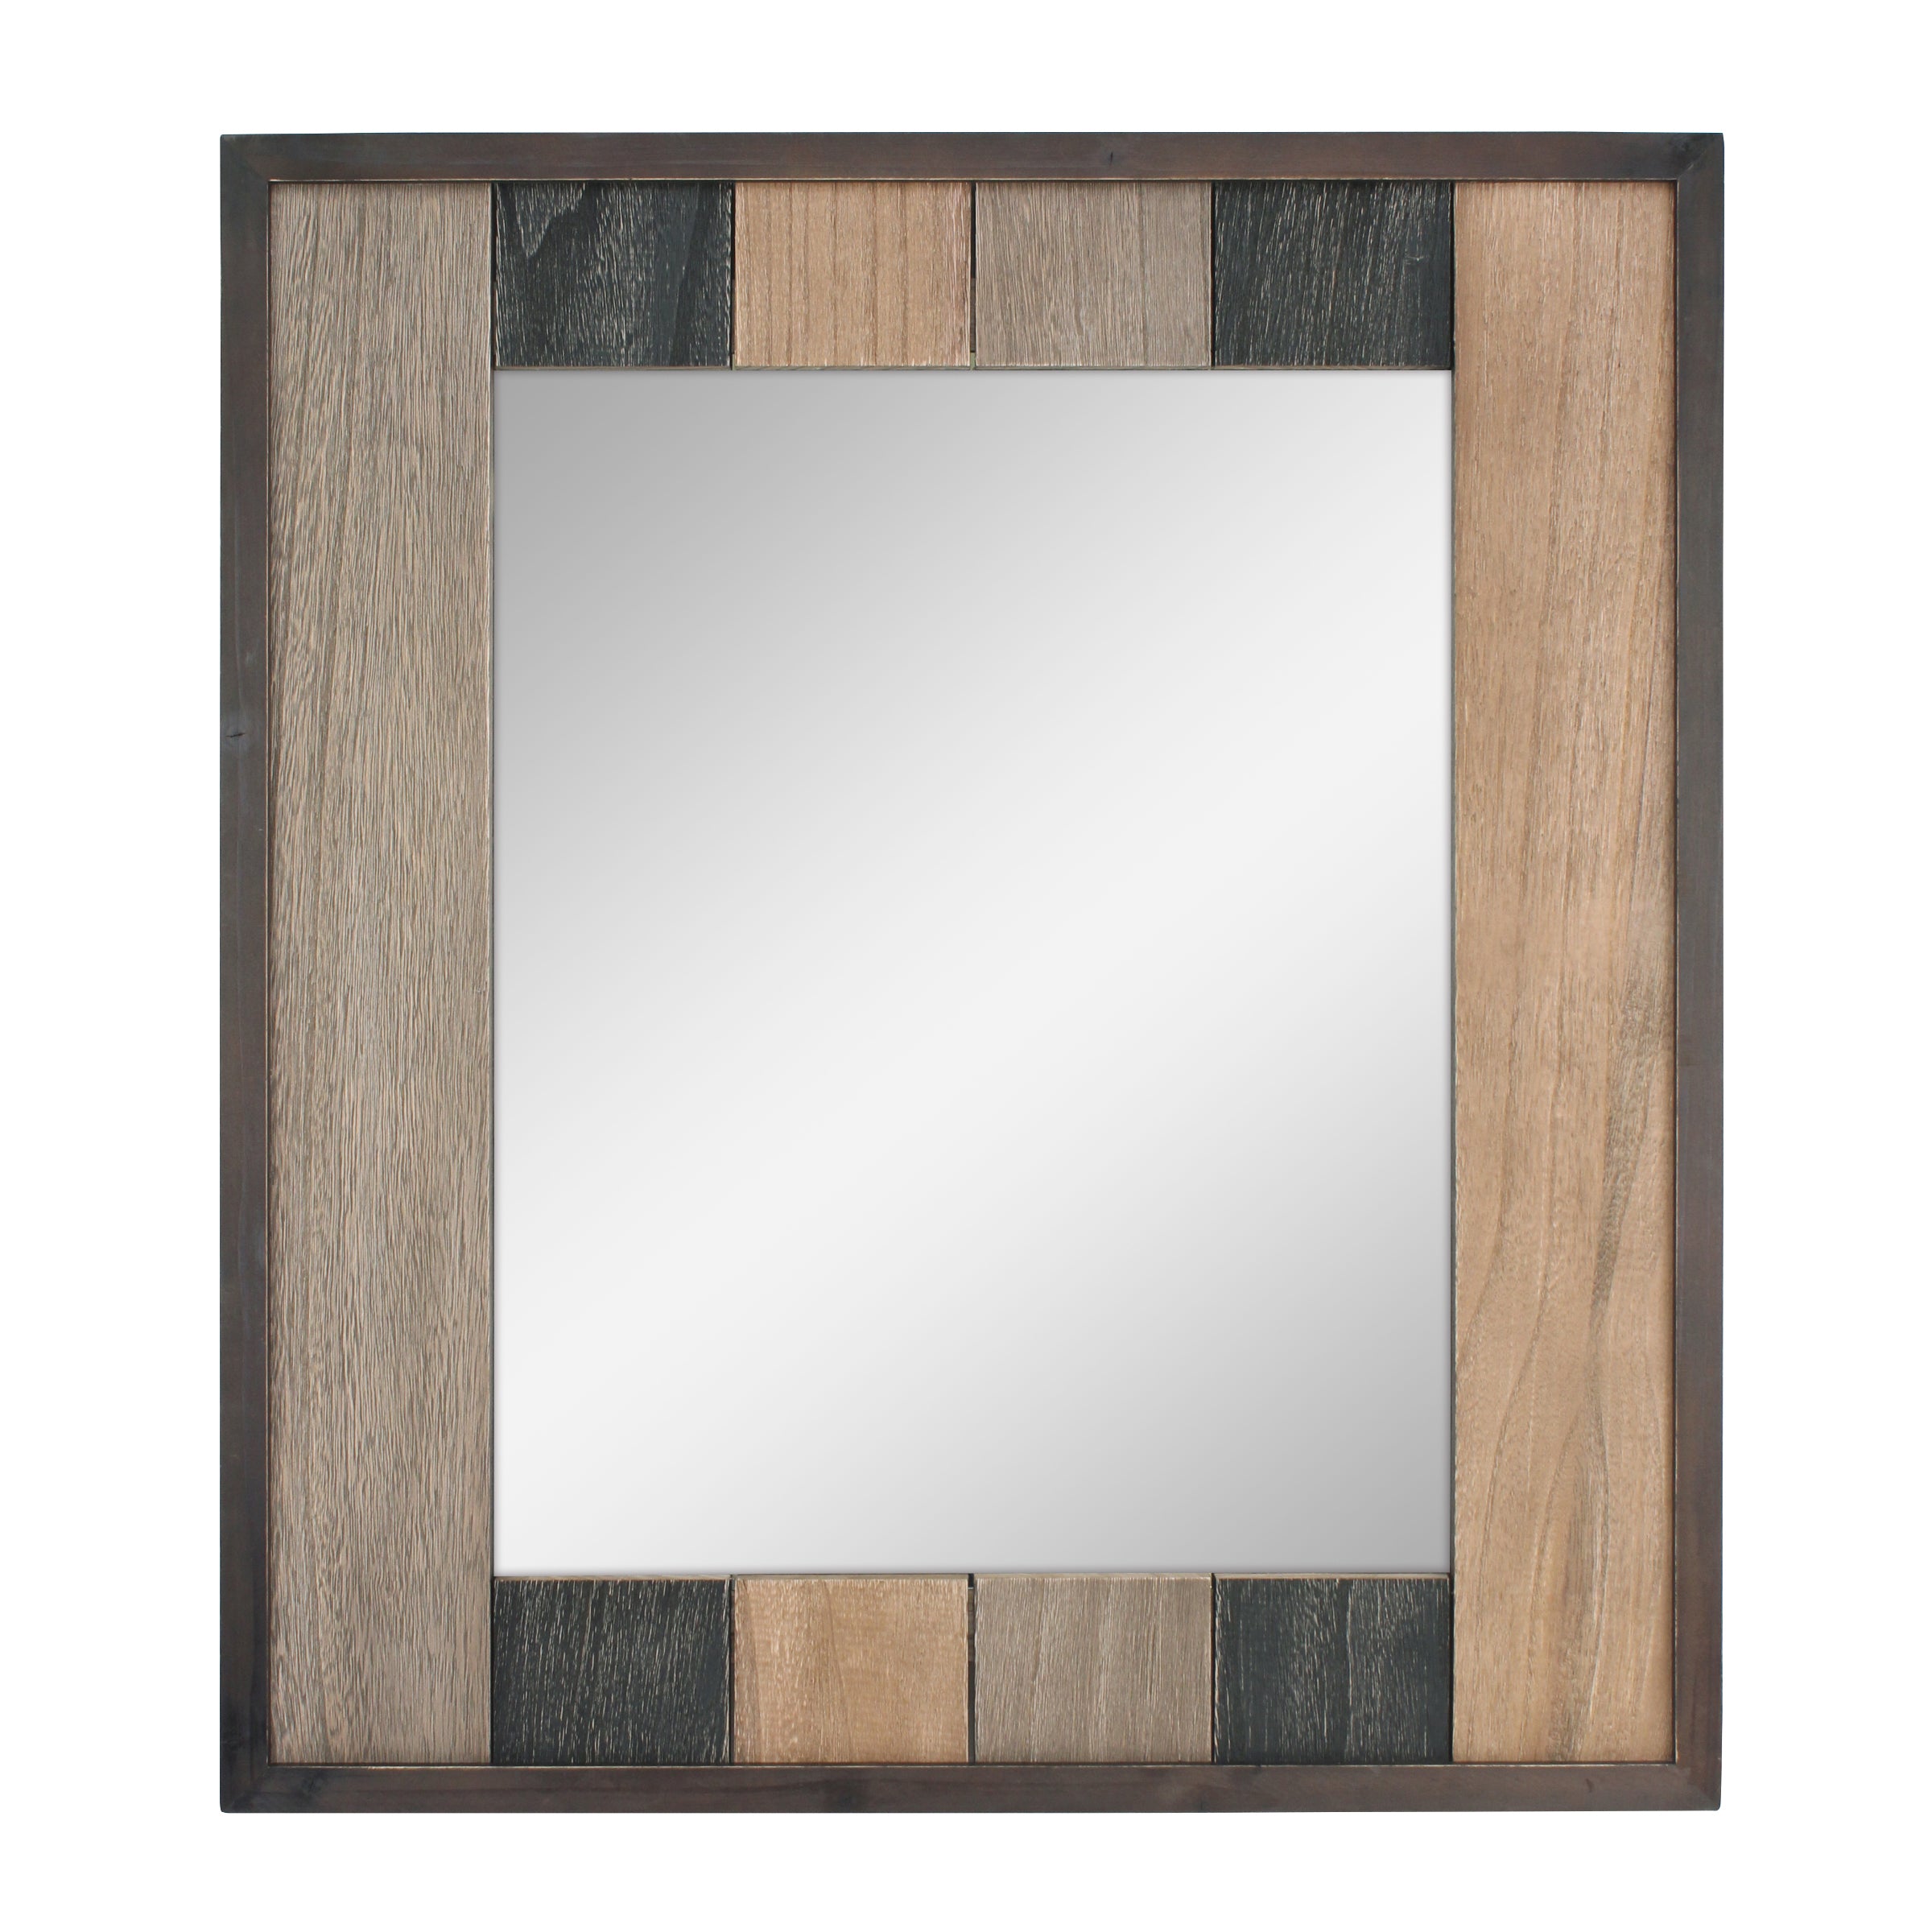 Rustic Wood Plank Mirror | Stonebriar Collection